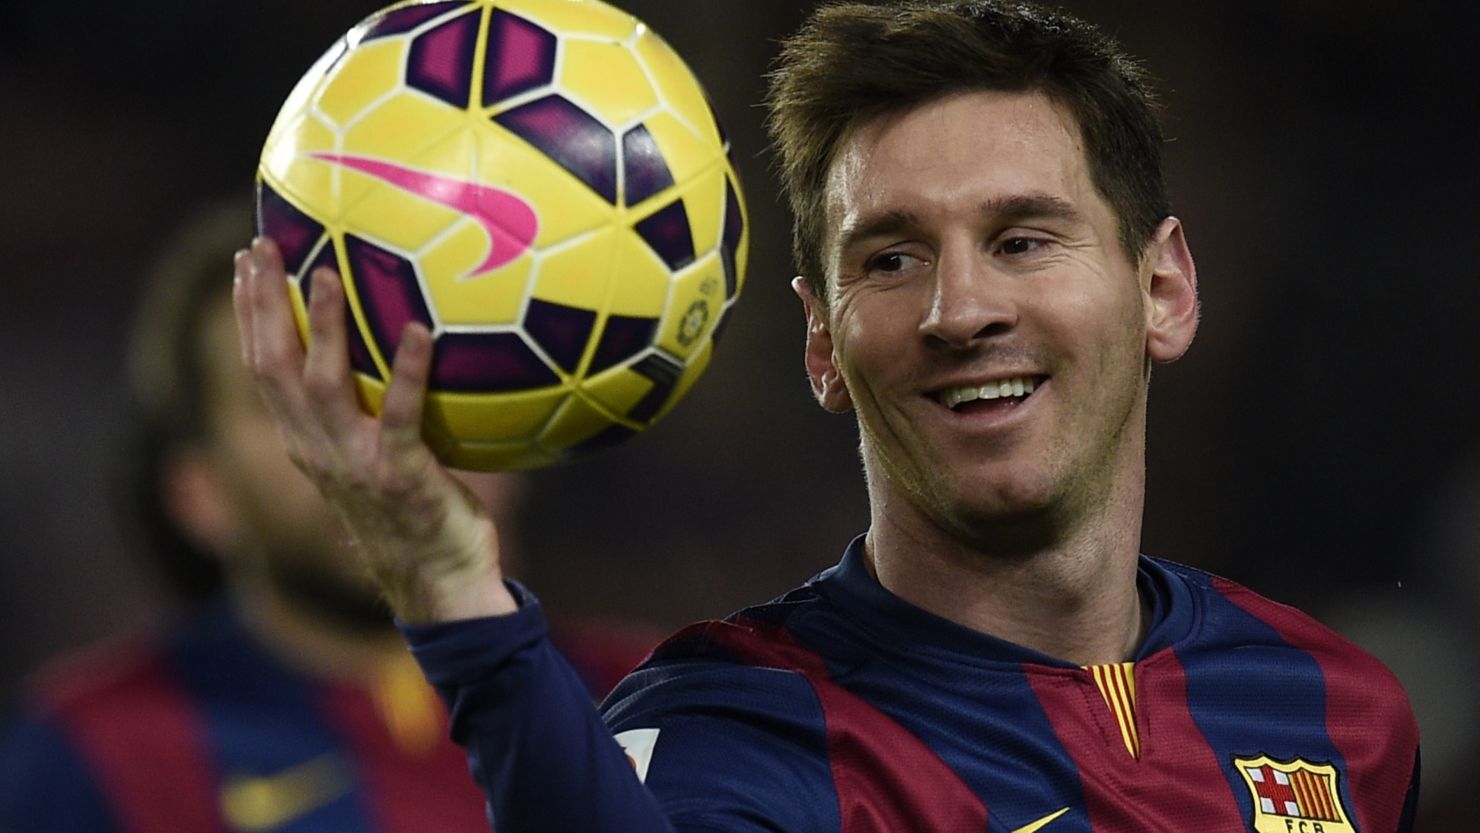 Lionel Messi's collection of match balls for scoring hat tricks has increased at a rapid rate in the last month. 